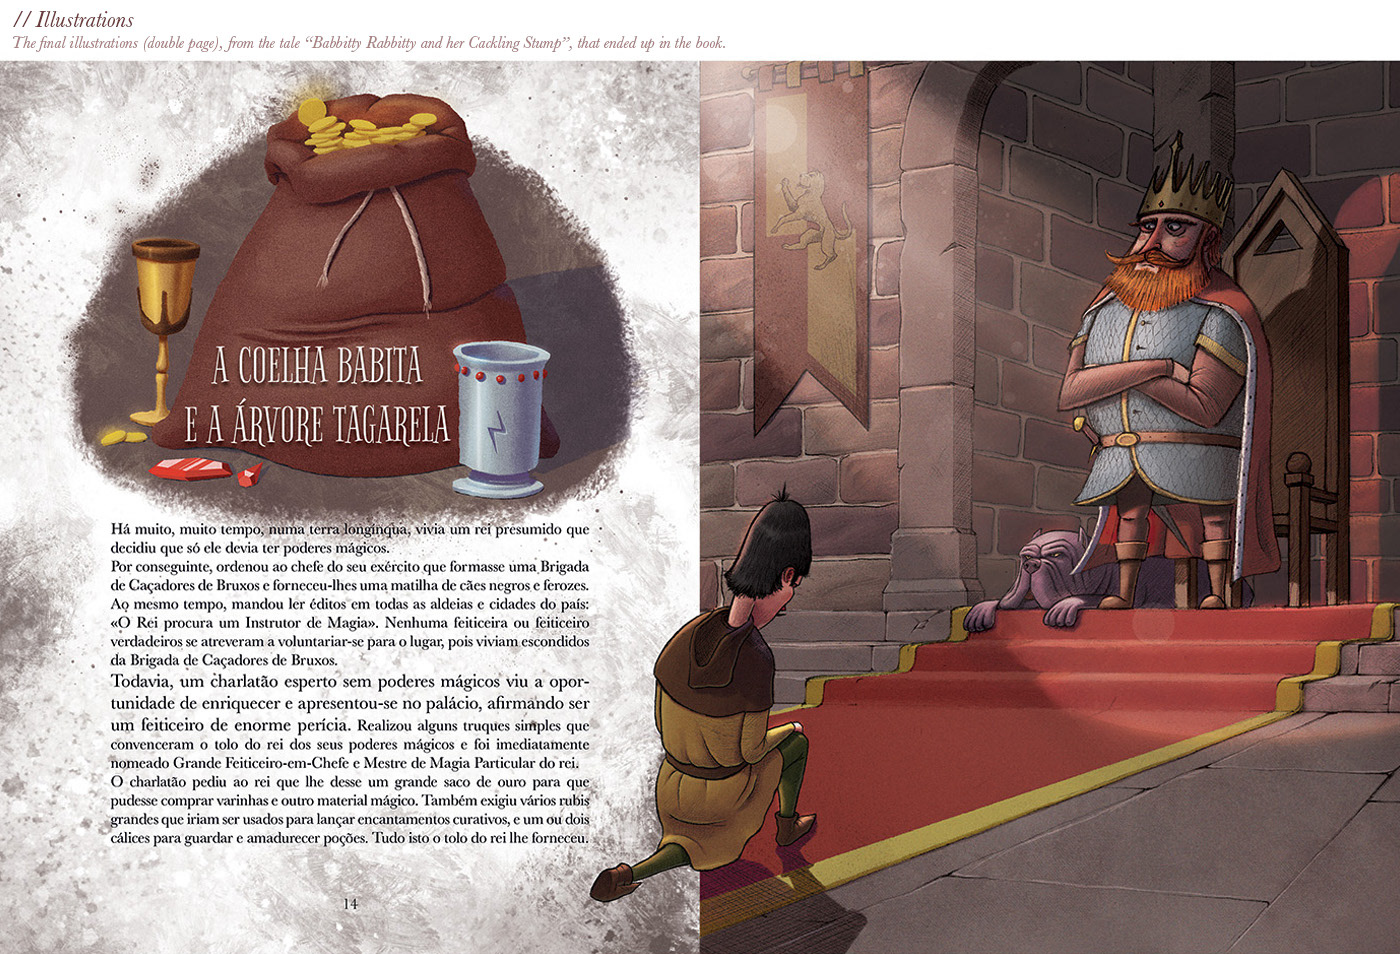 harry potter Beedle the Bard beedle children book Picture book J.K. Rowling medieval wizard ILLUSTRATION  editorial